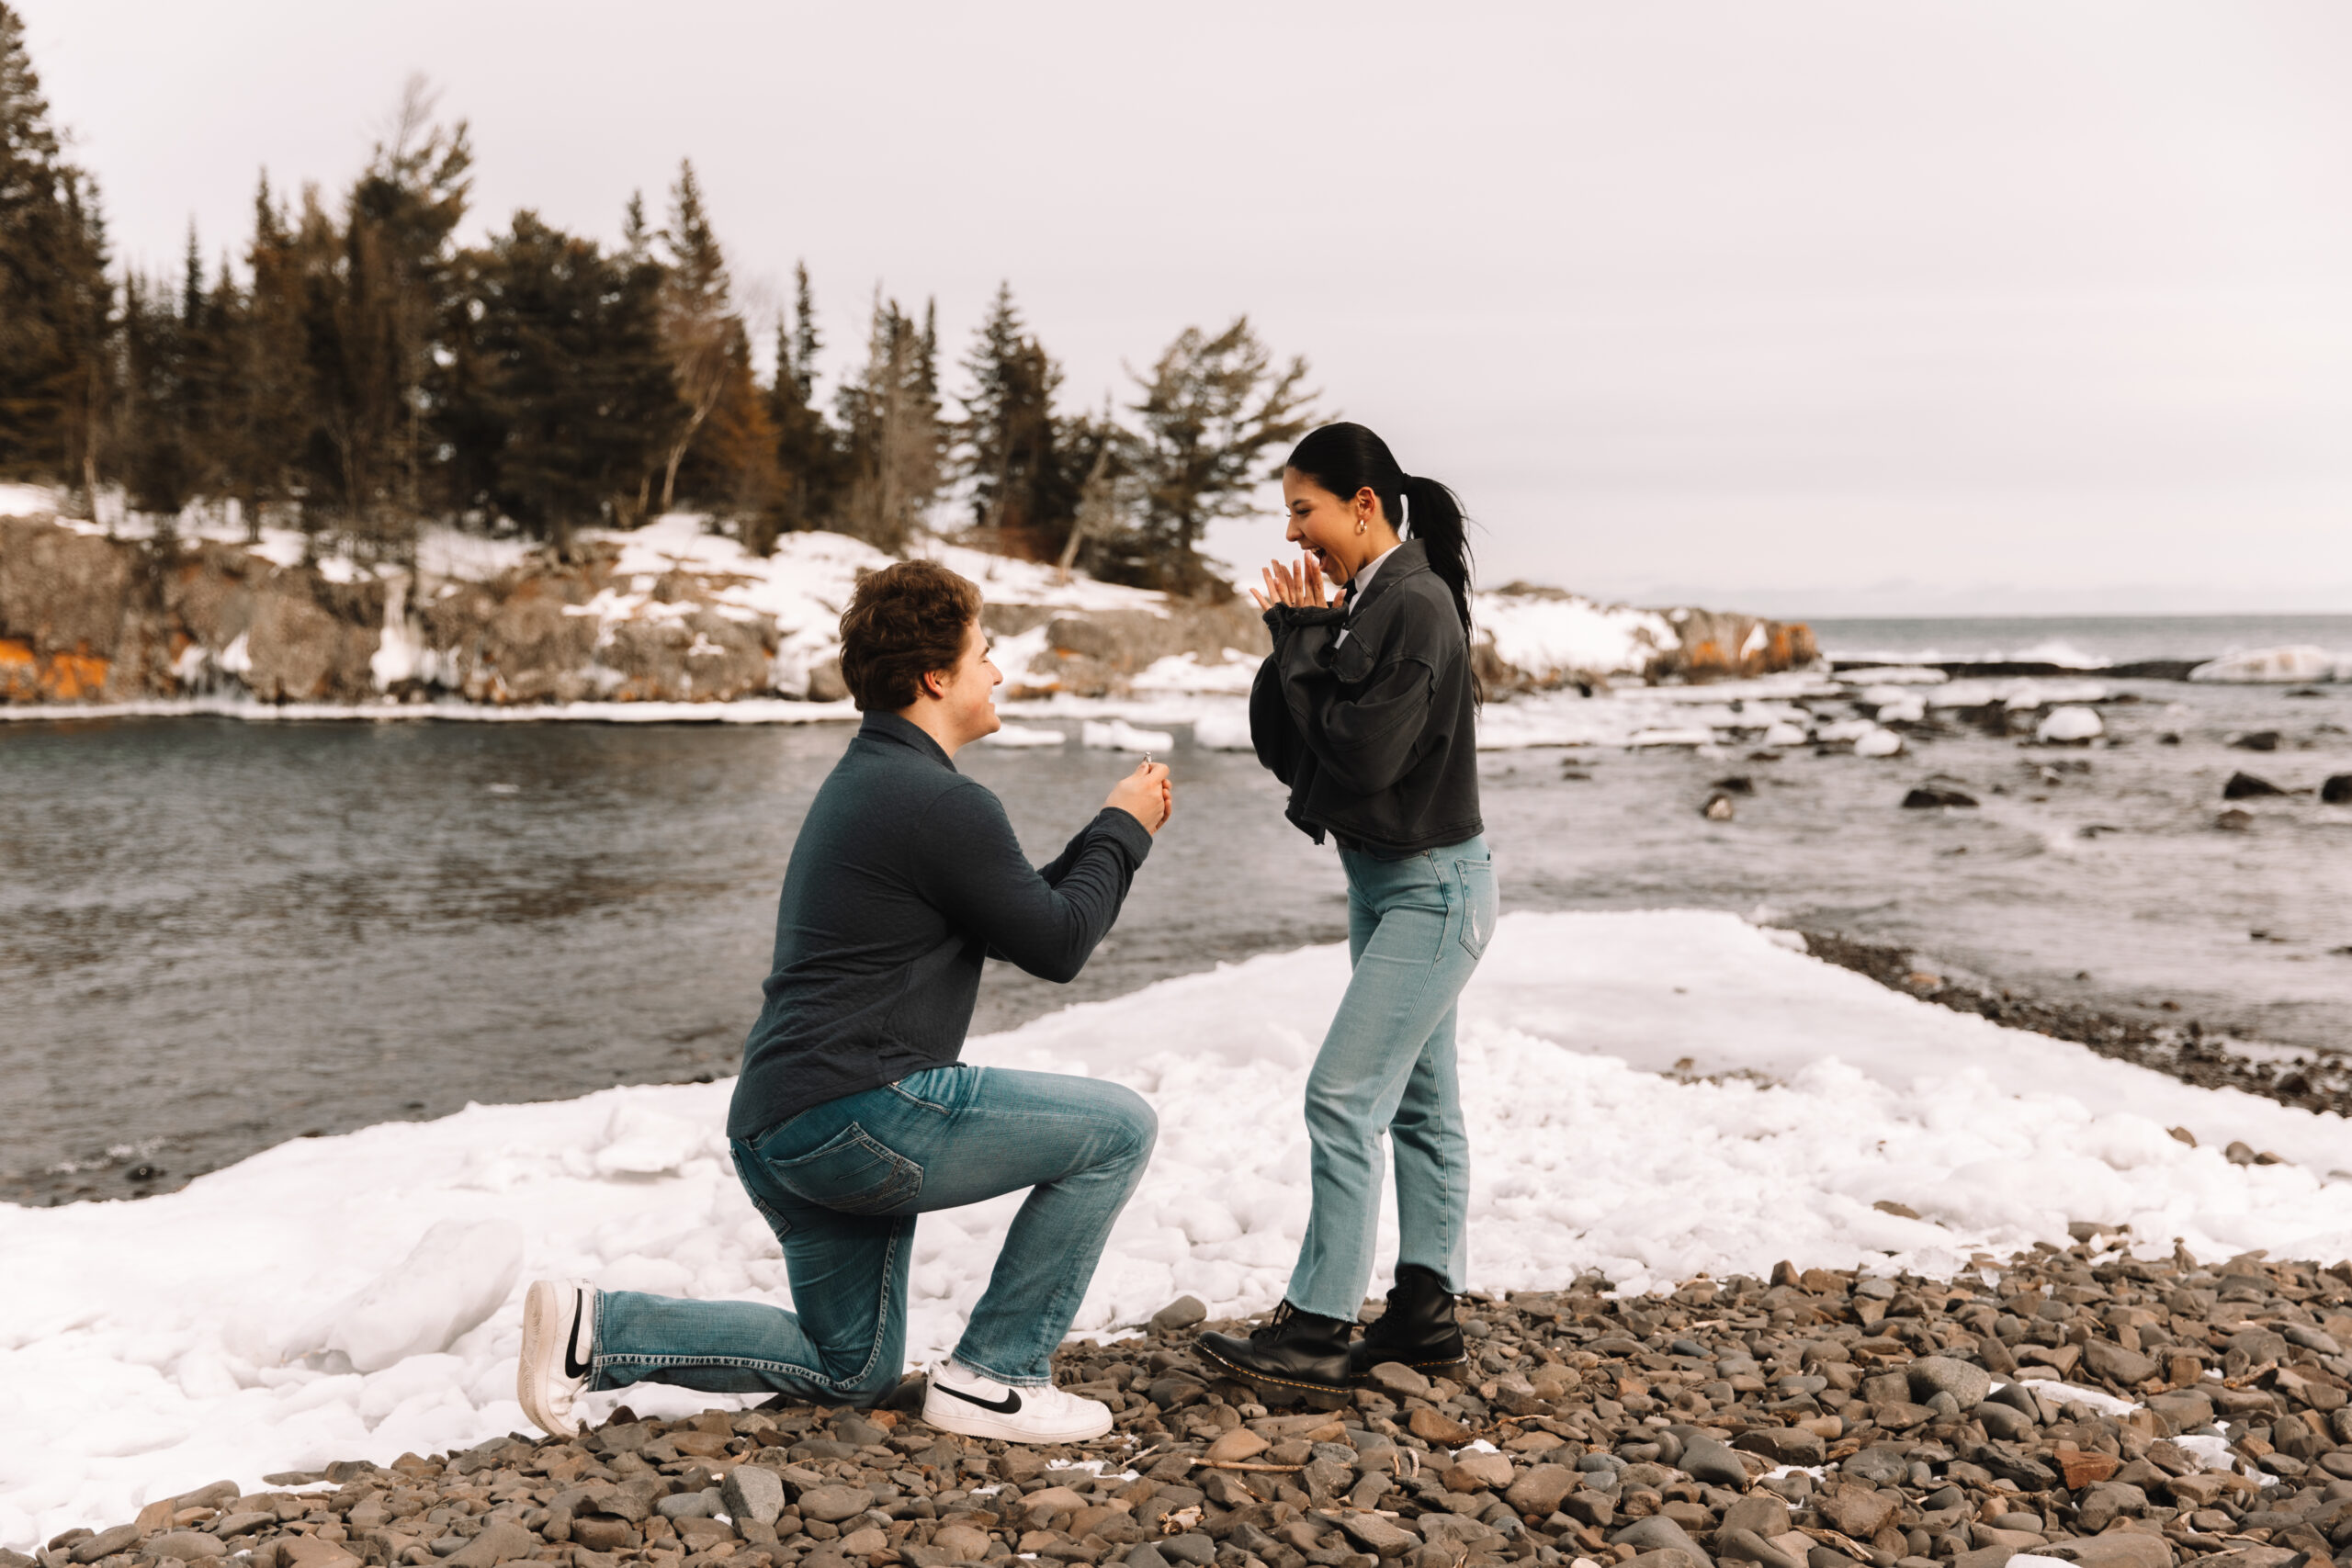 A guy proposing to his girl on a pebbled black sand beach with a beautiful lake in the background surrounded by snow.